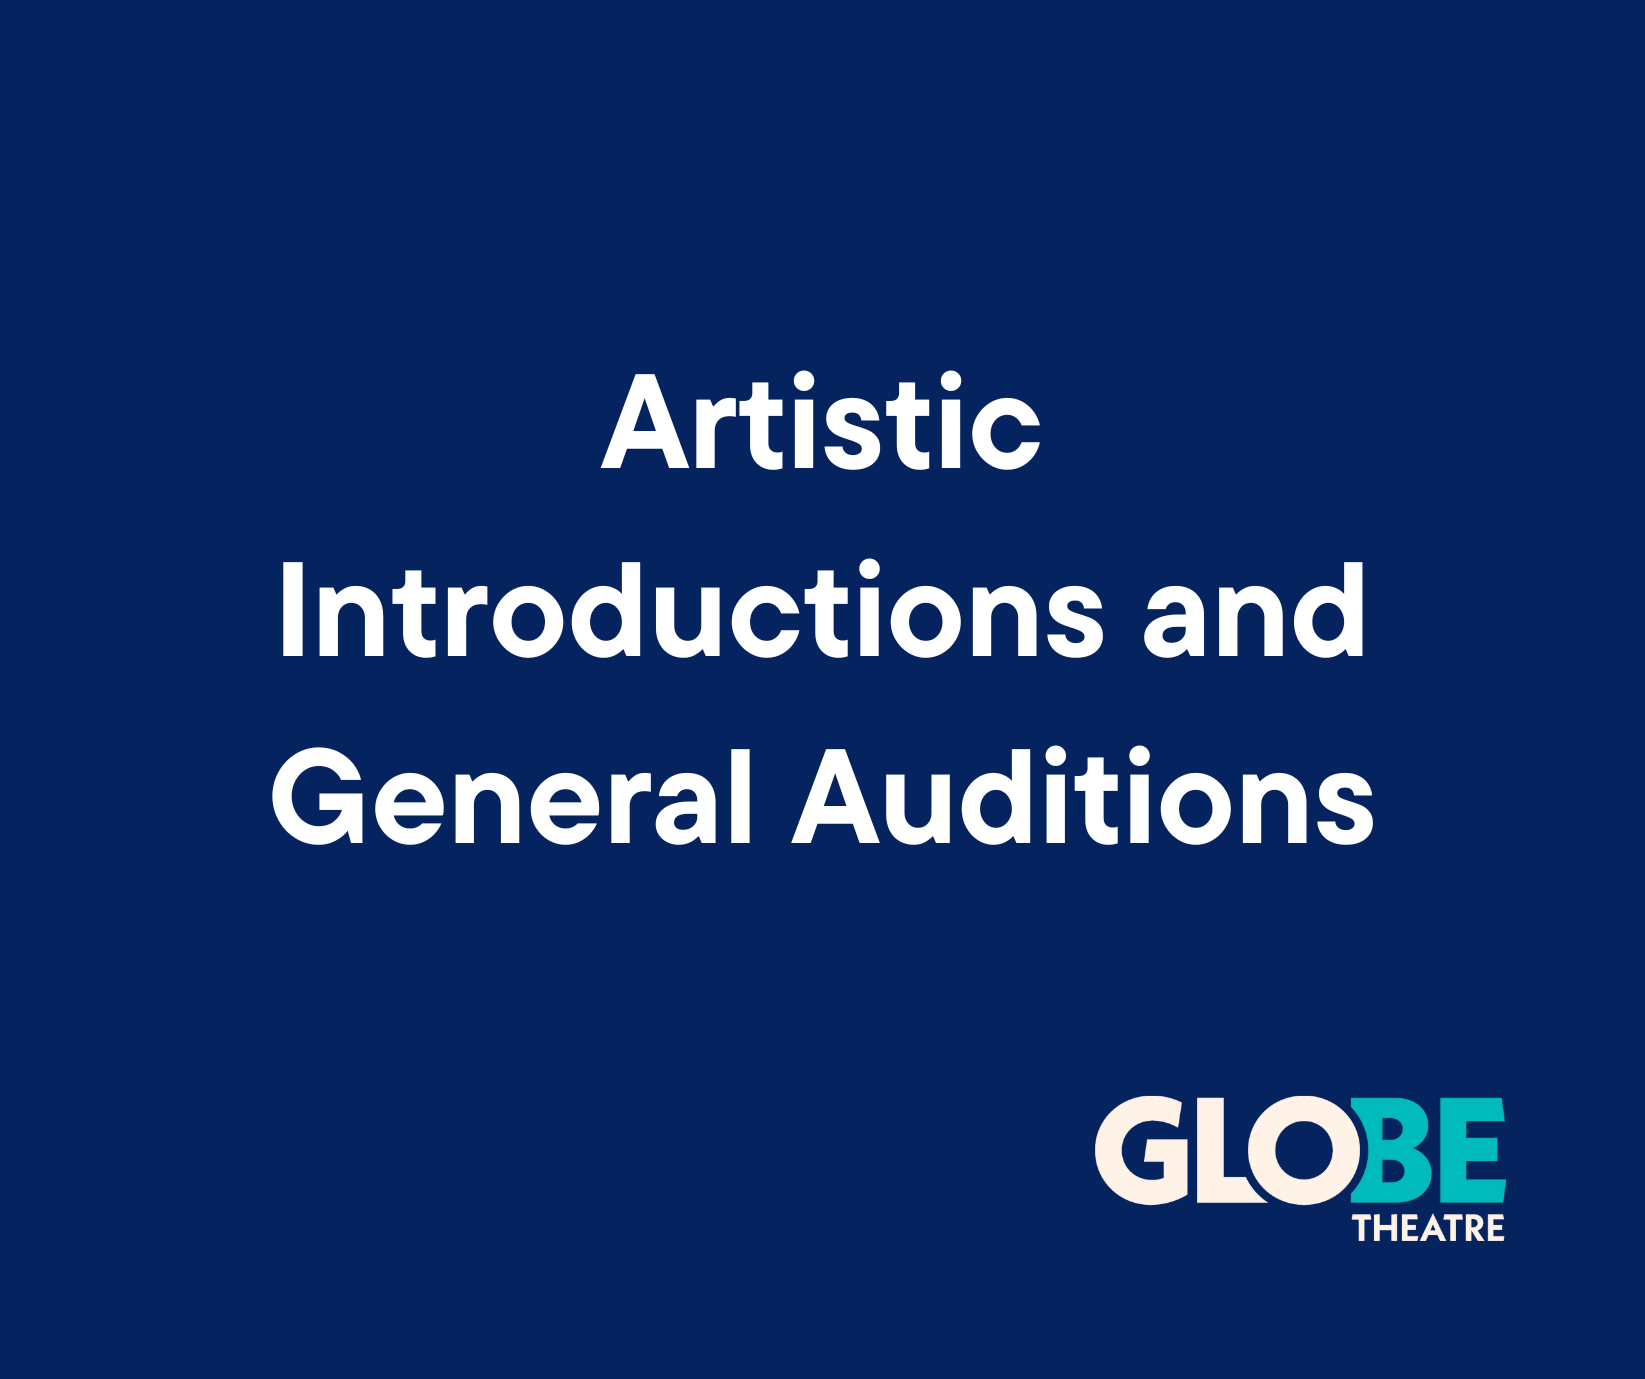 Artistic Introductions and General Auditions